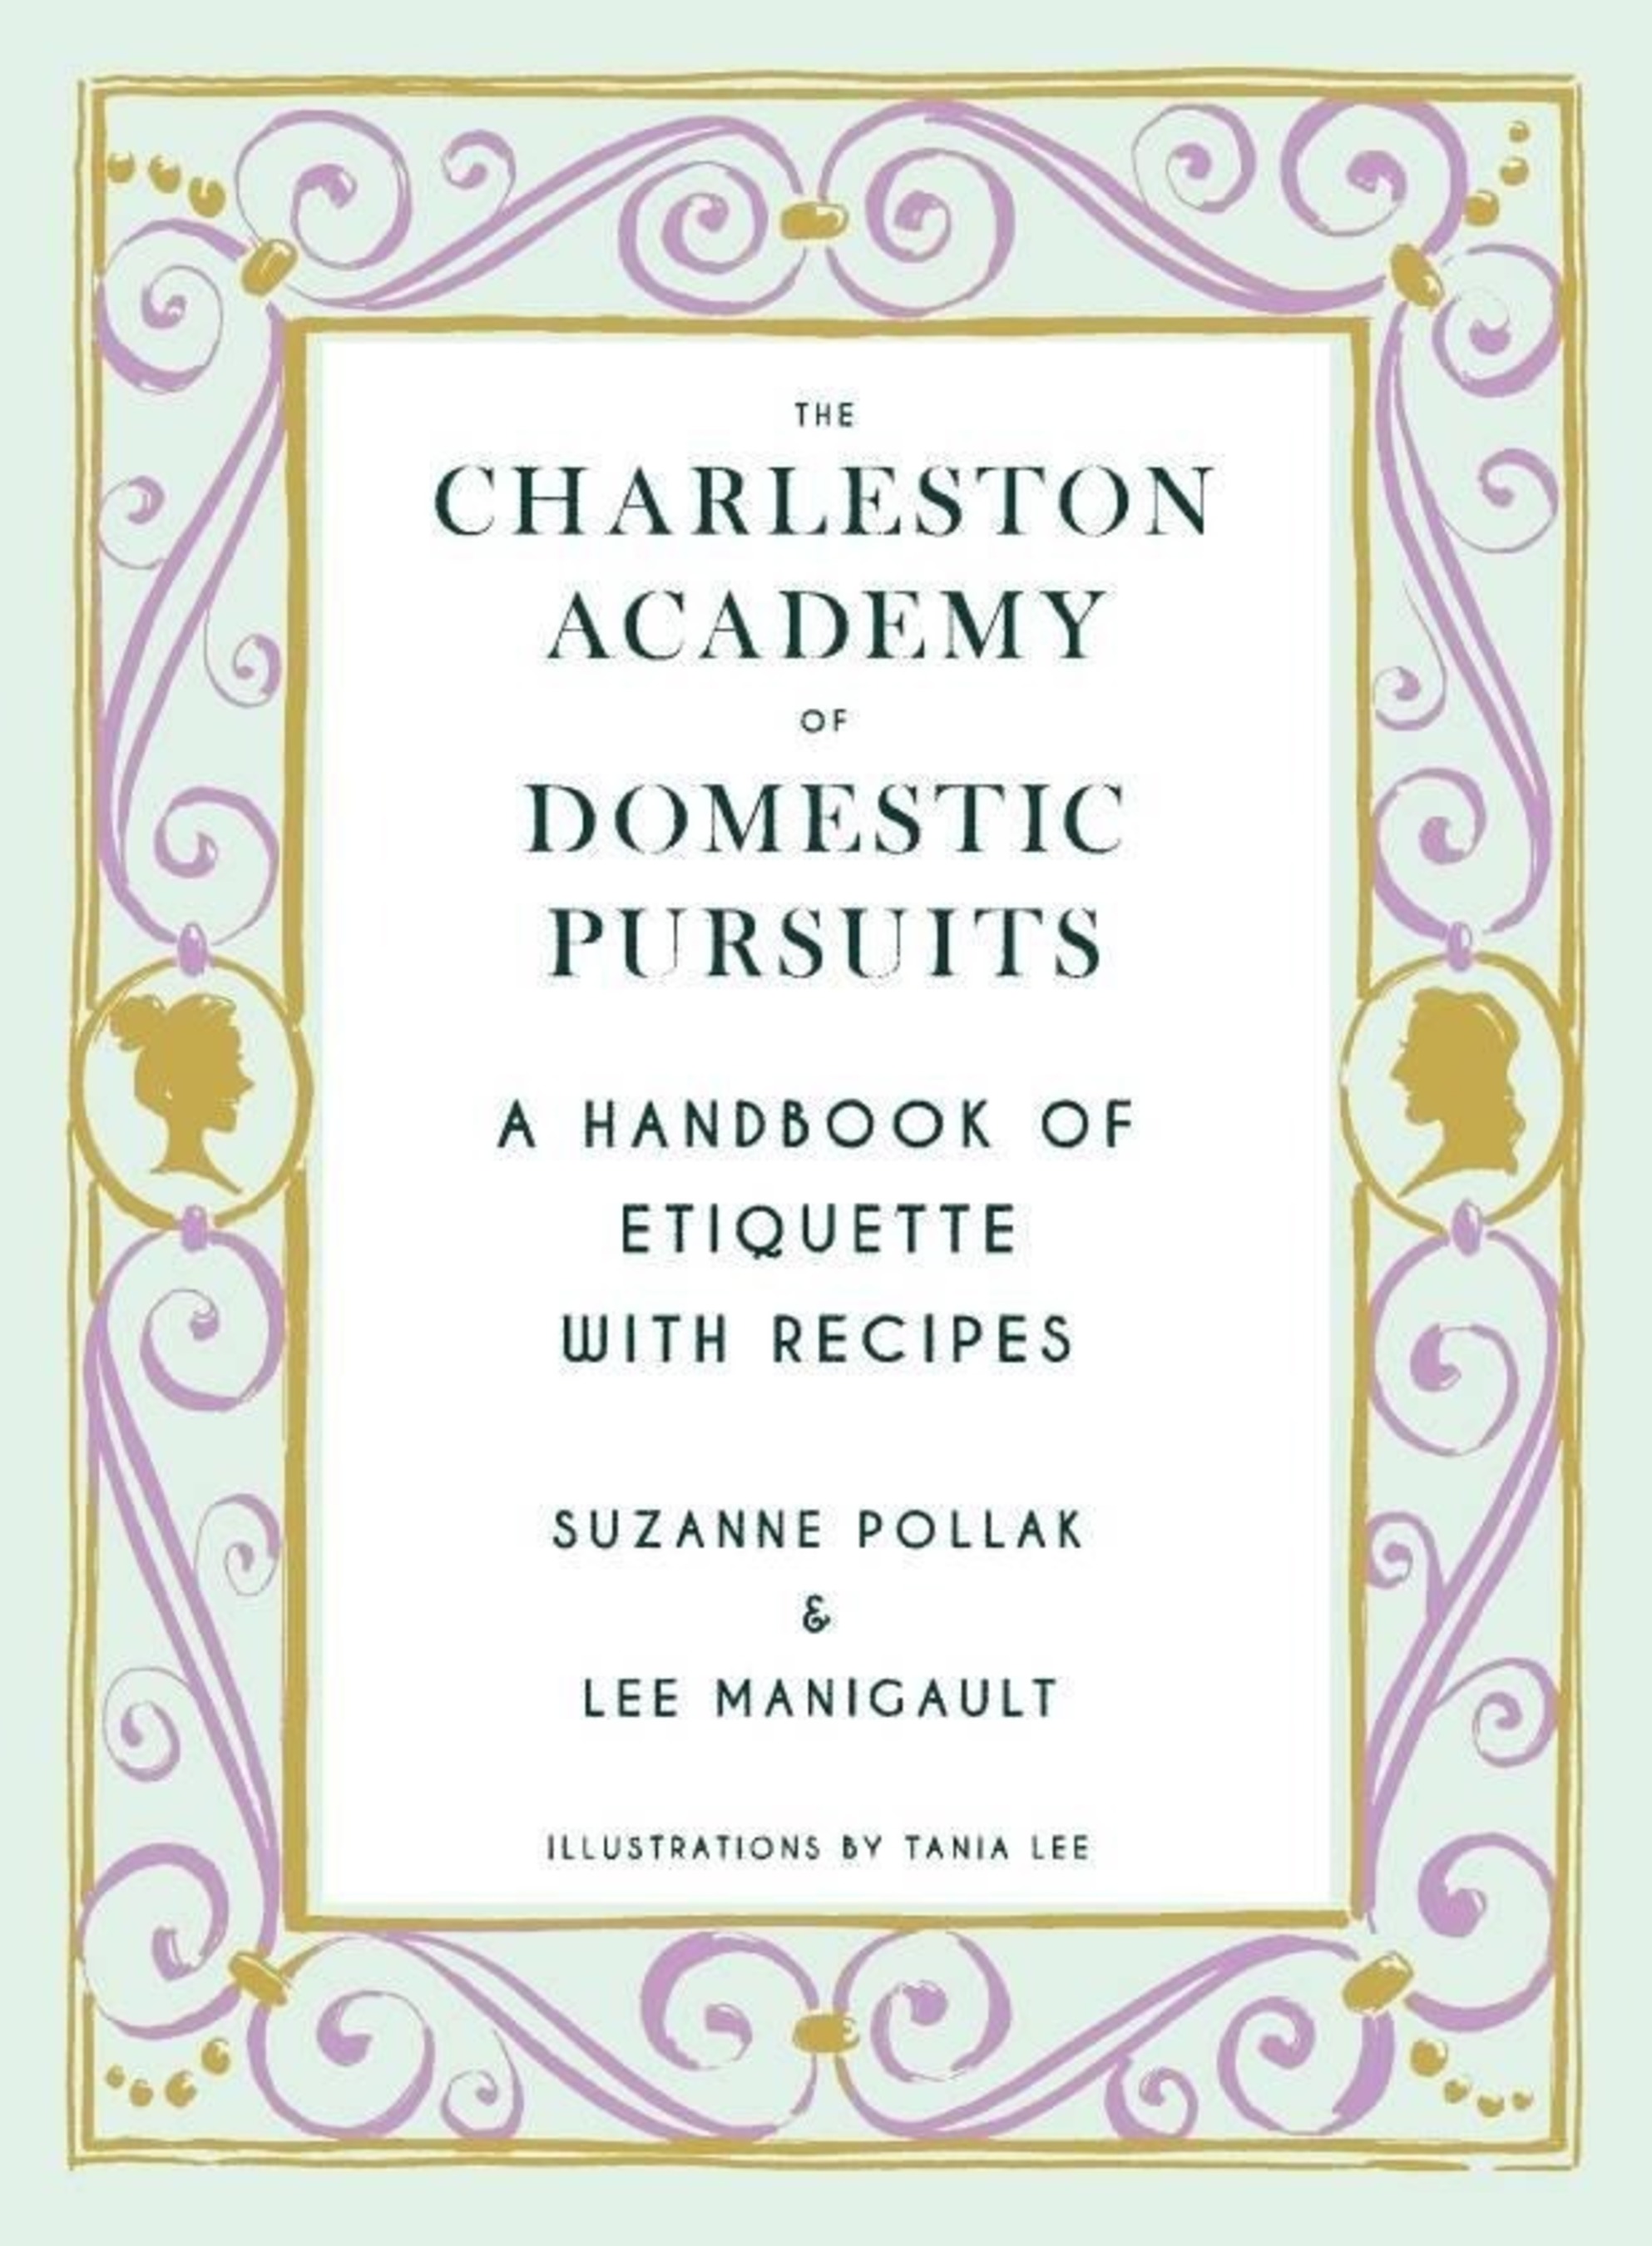 The Charleston Academy of Domestic Pursuits - a Handbook of Etiquette with Recipes Book Cover  (PRNewsFoto/The Charleston Academy of Domest)